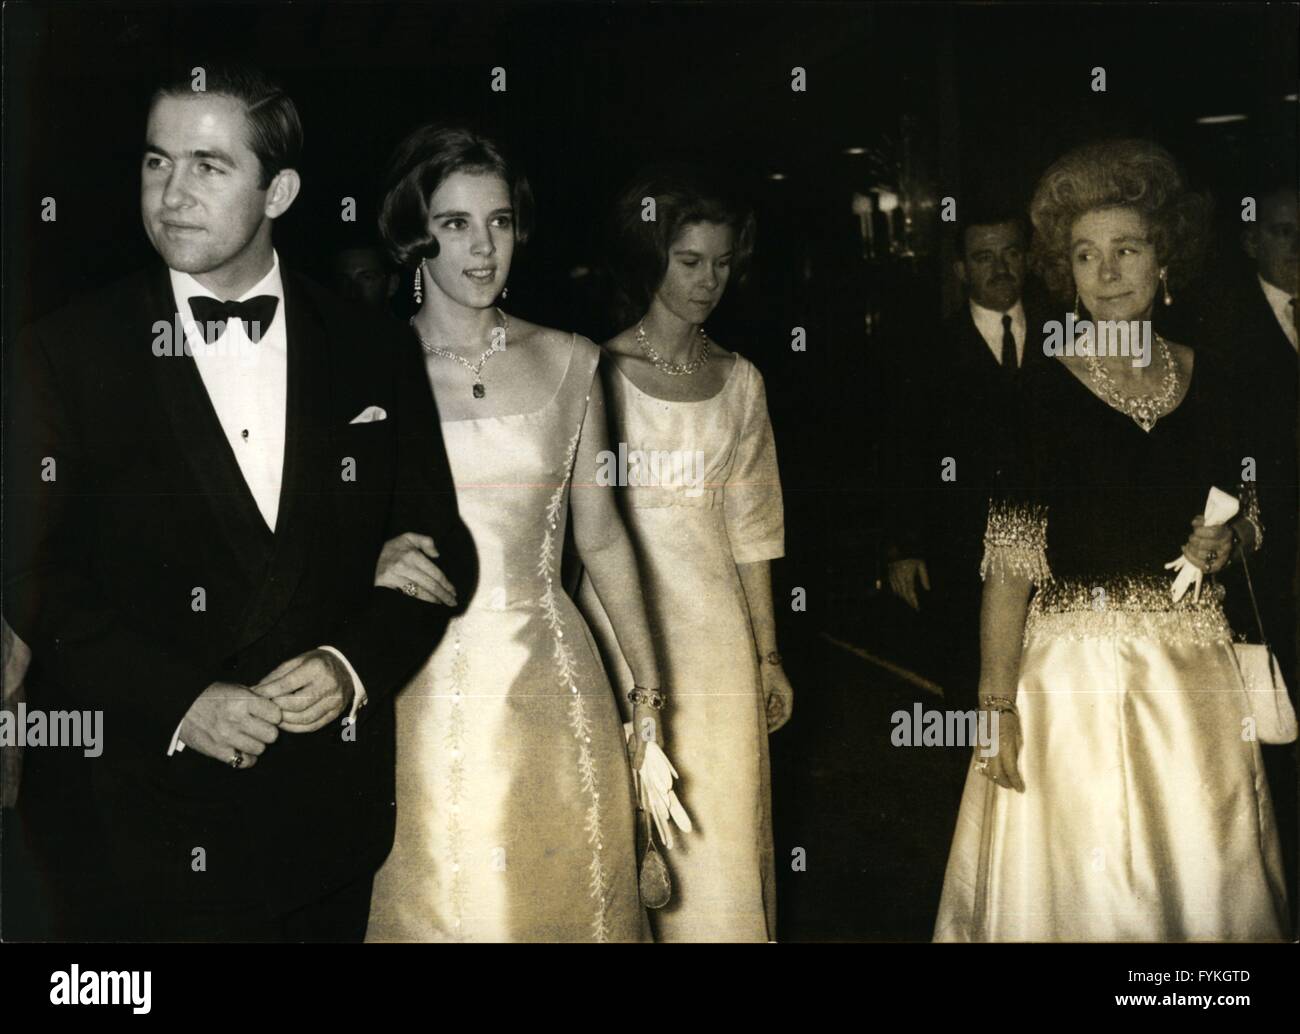 1963 - (from left) King Konstantin, Anna Maria, Princess Irene and Frederiecke. At a concert given by Princess Irene. © Keystone Pictures USA/ZUMAPRESS.com/Alamy Live News Stock Photo